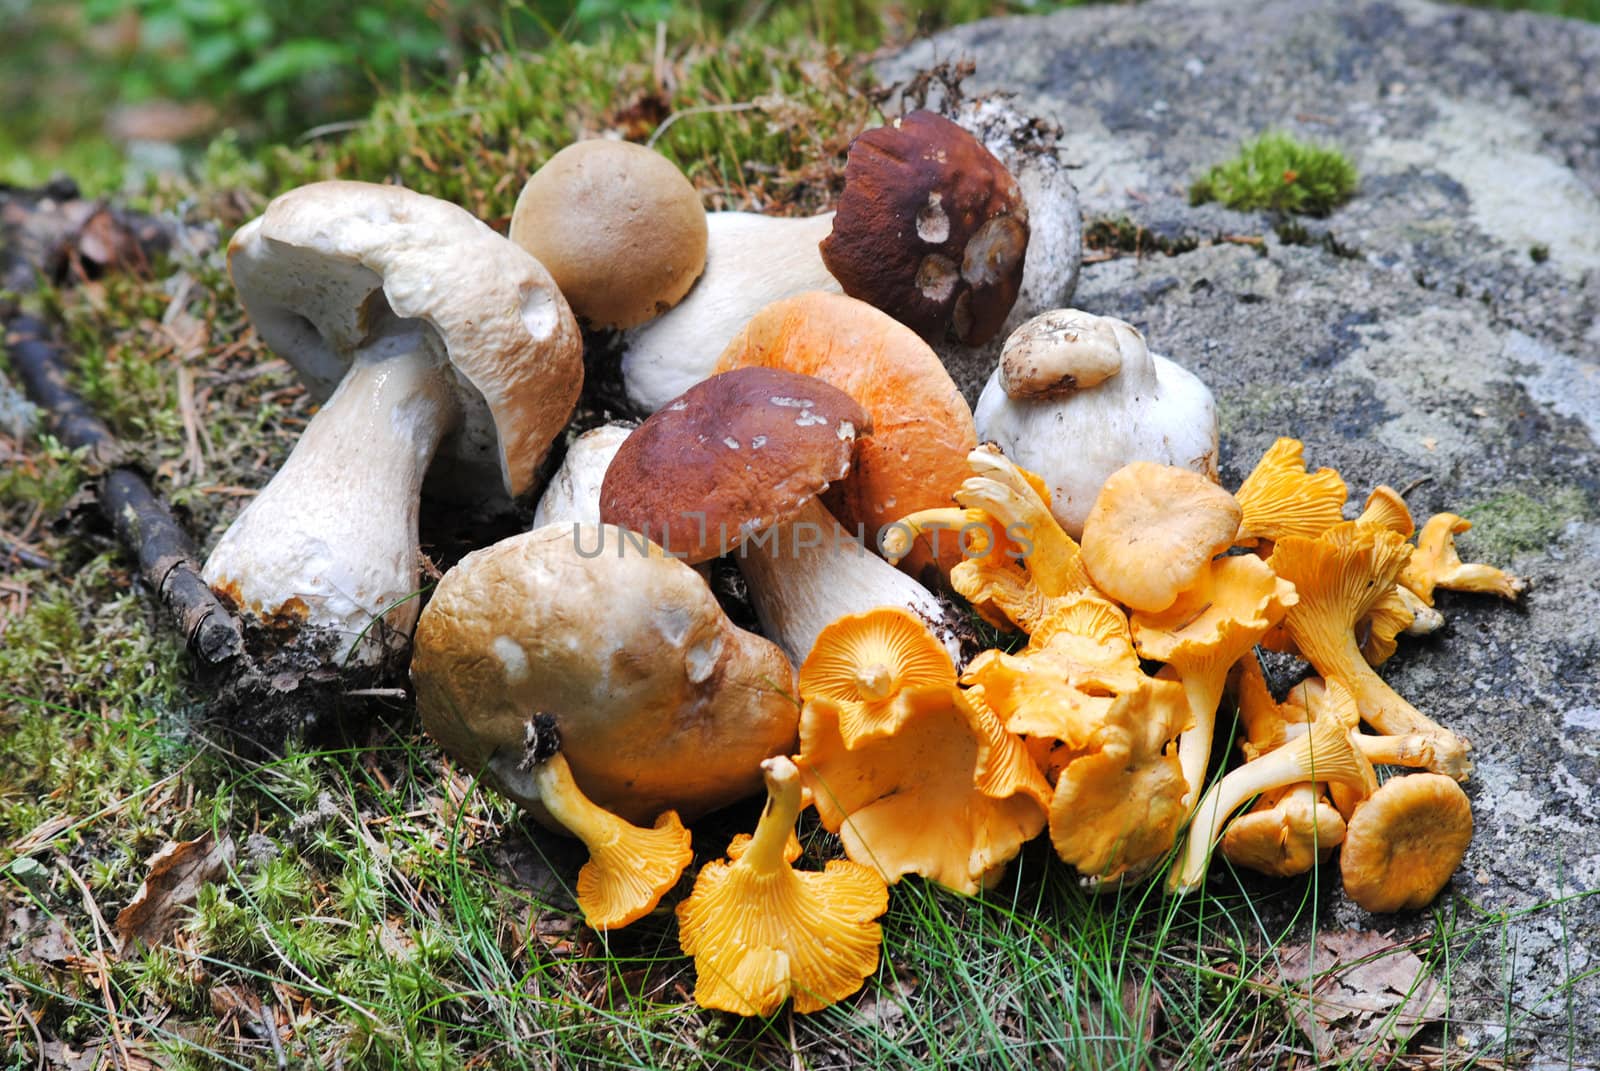 different edible mushrooms are on the rock